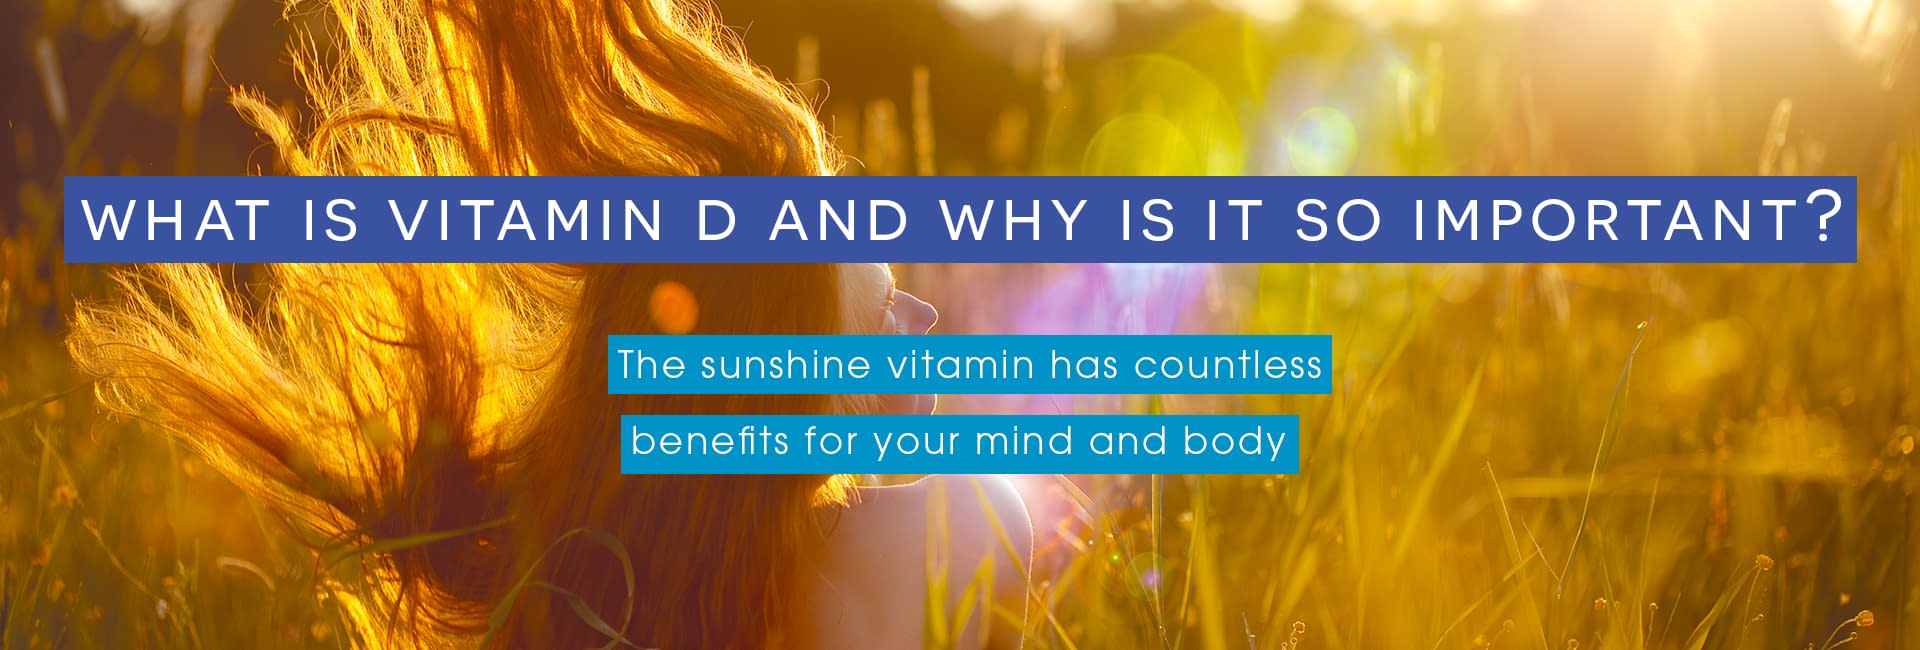 what is Vitamin D and why is it so important cover